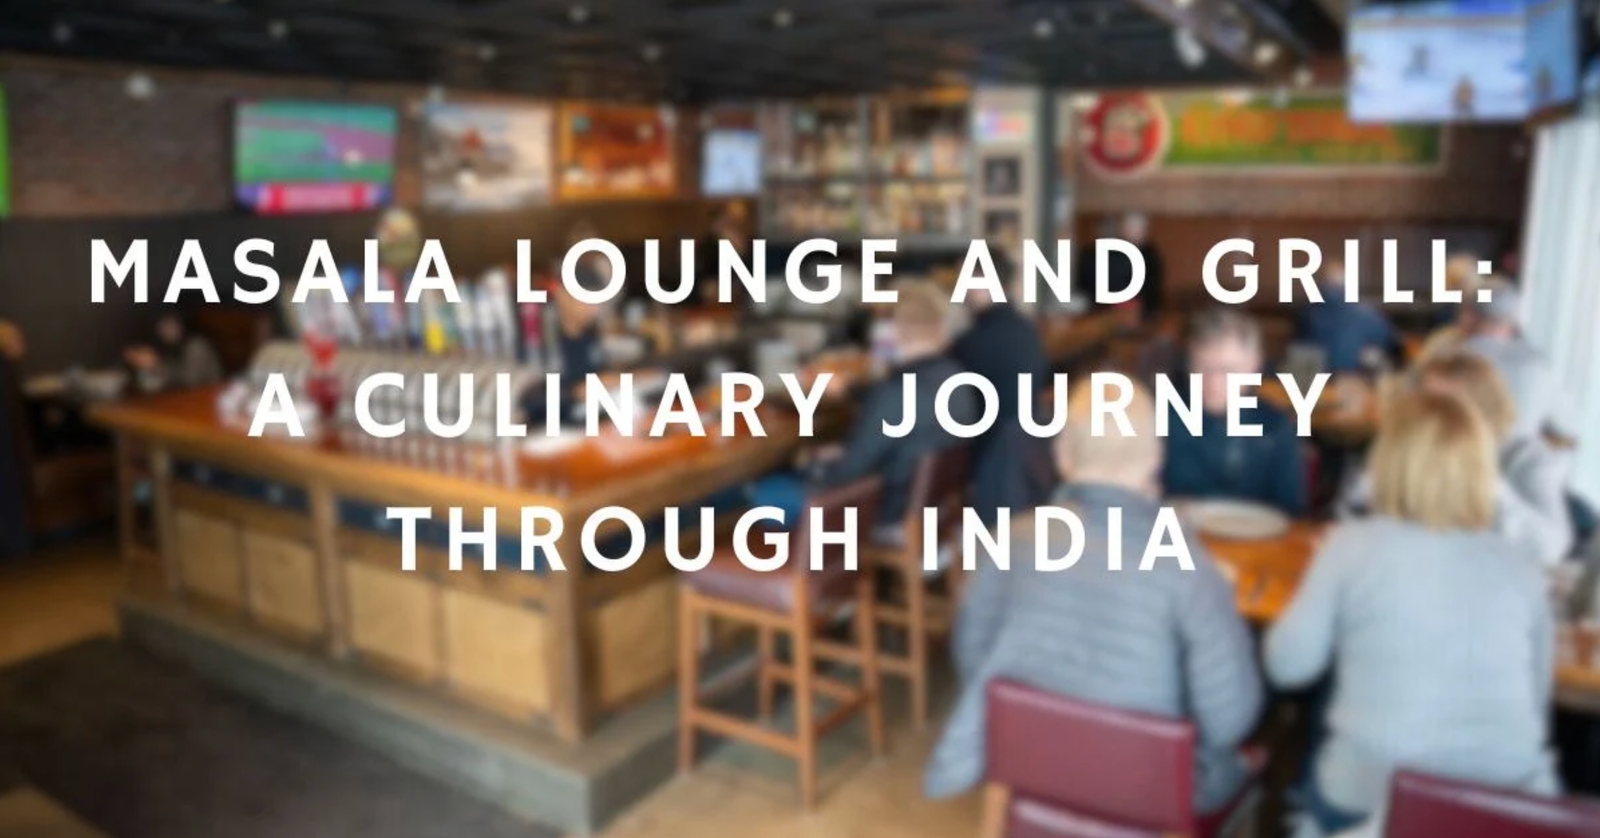 Masala Lounge and Grill: A Culinary Journey Through India